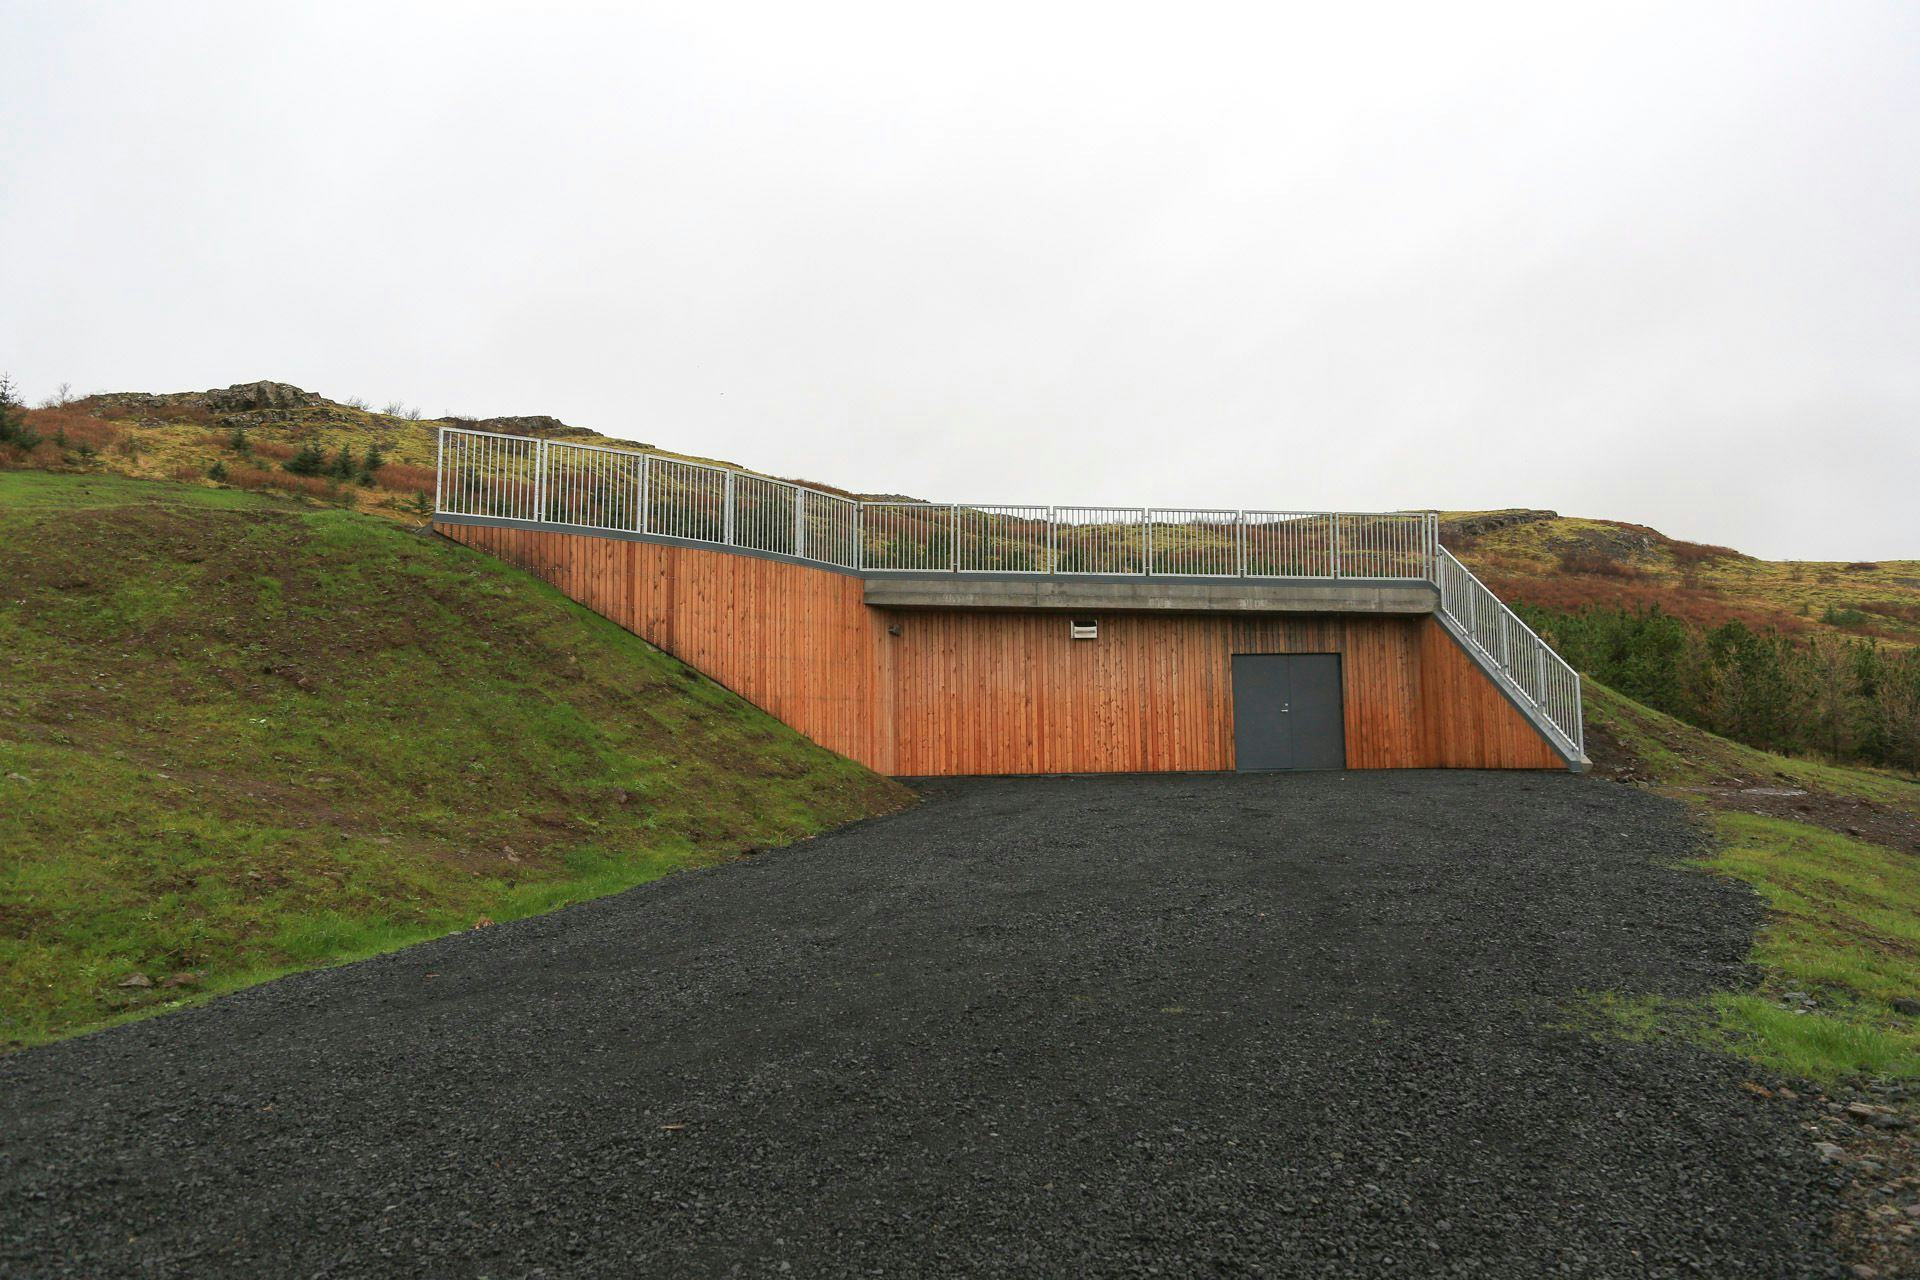 A modern structure with a wood facade built into a grassy hillside